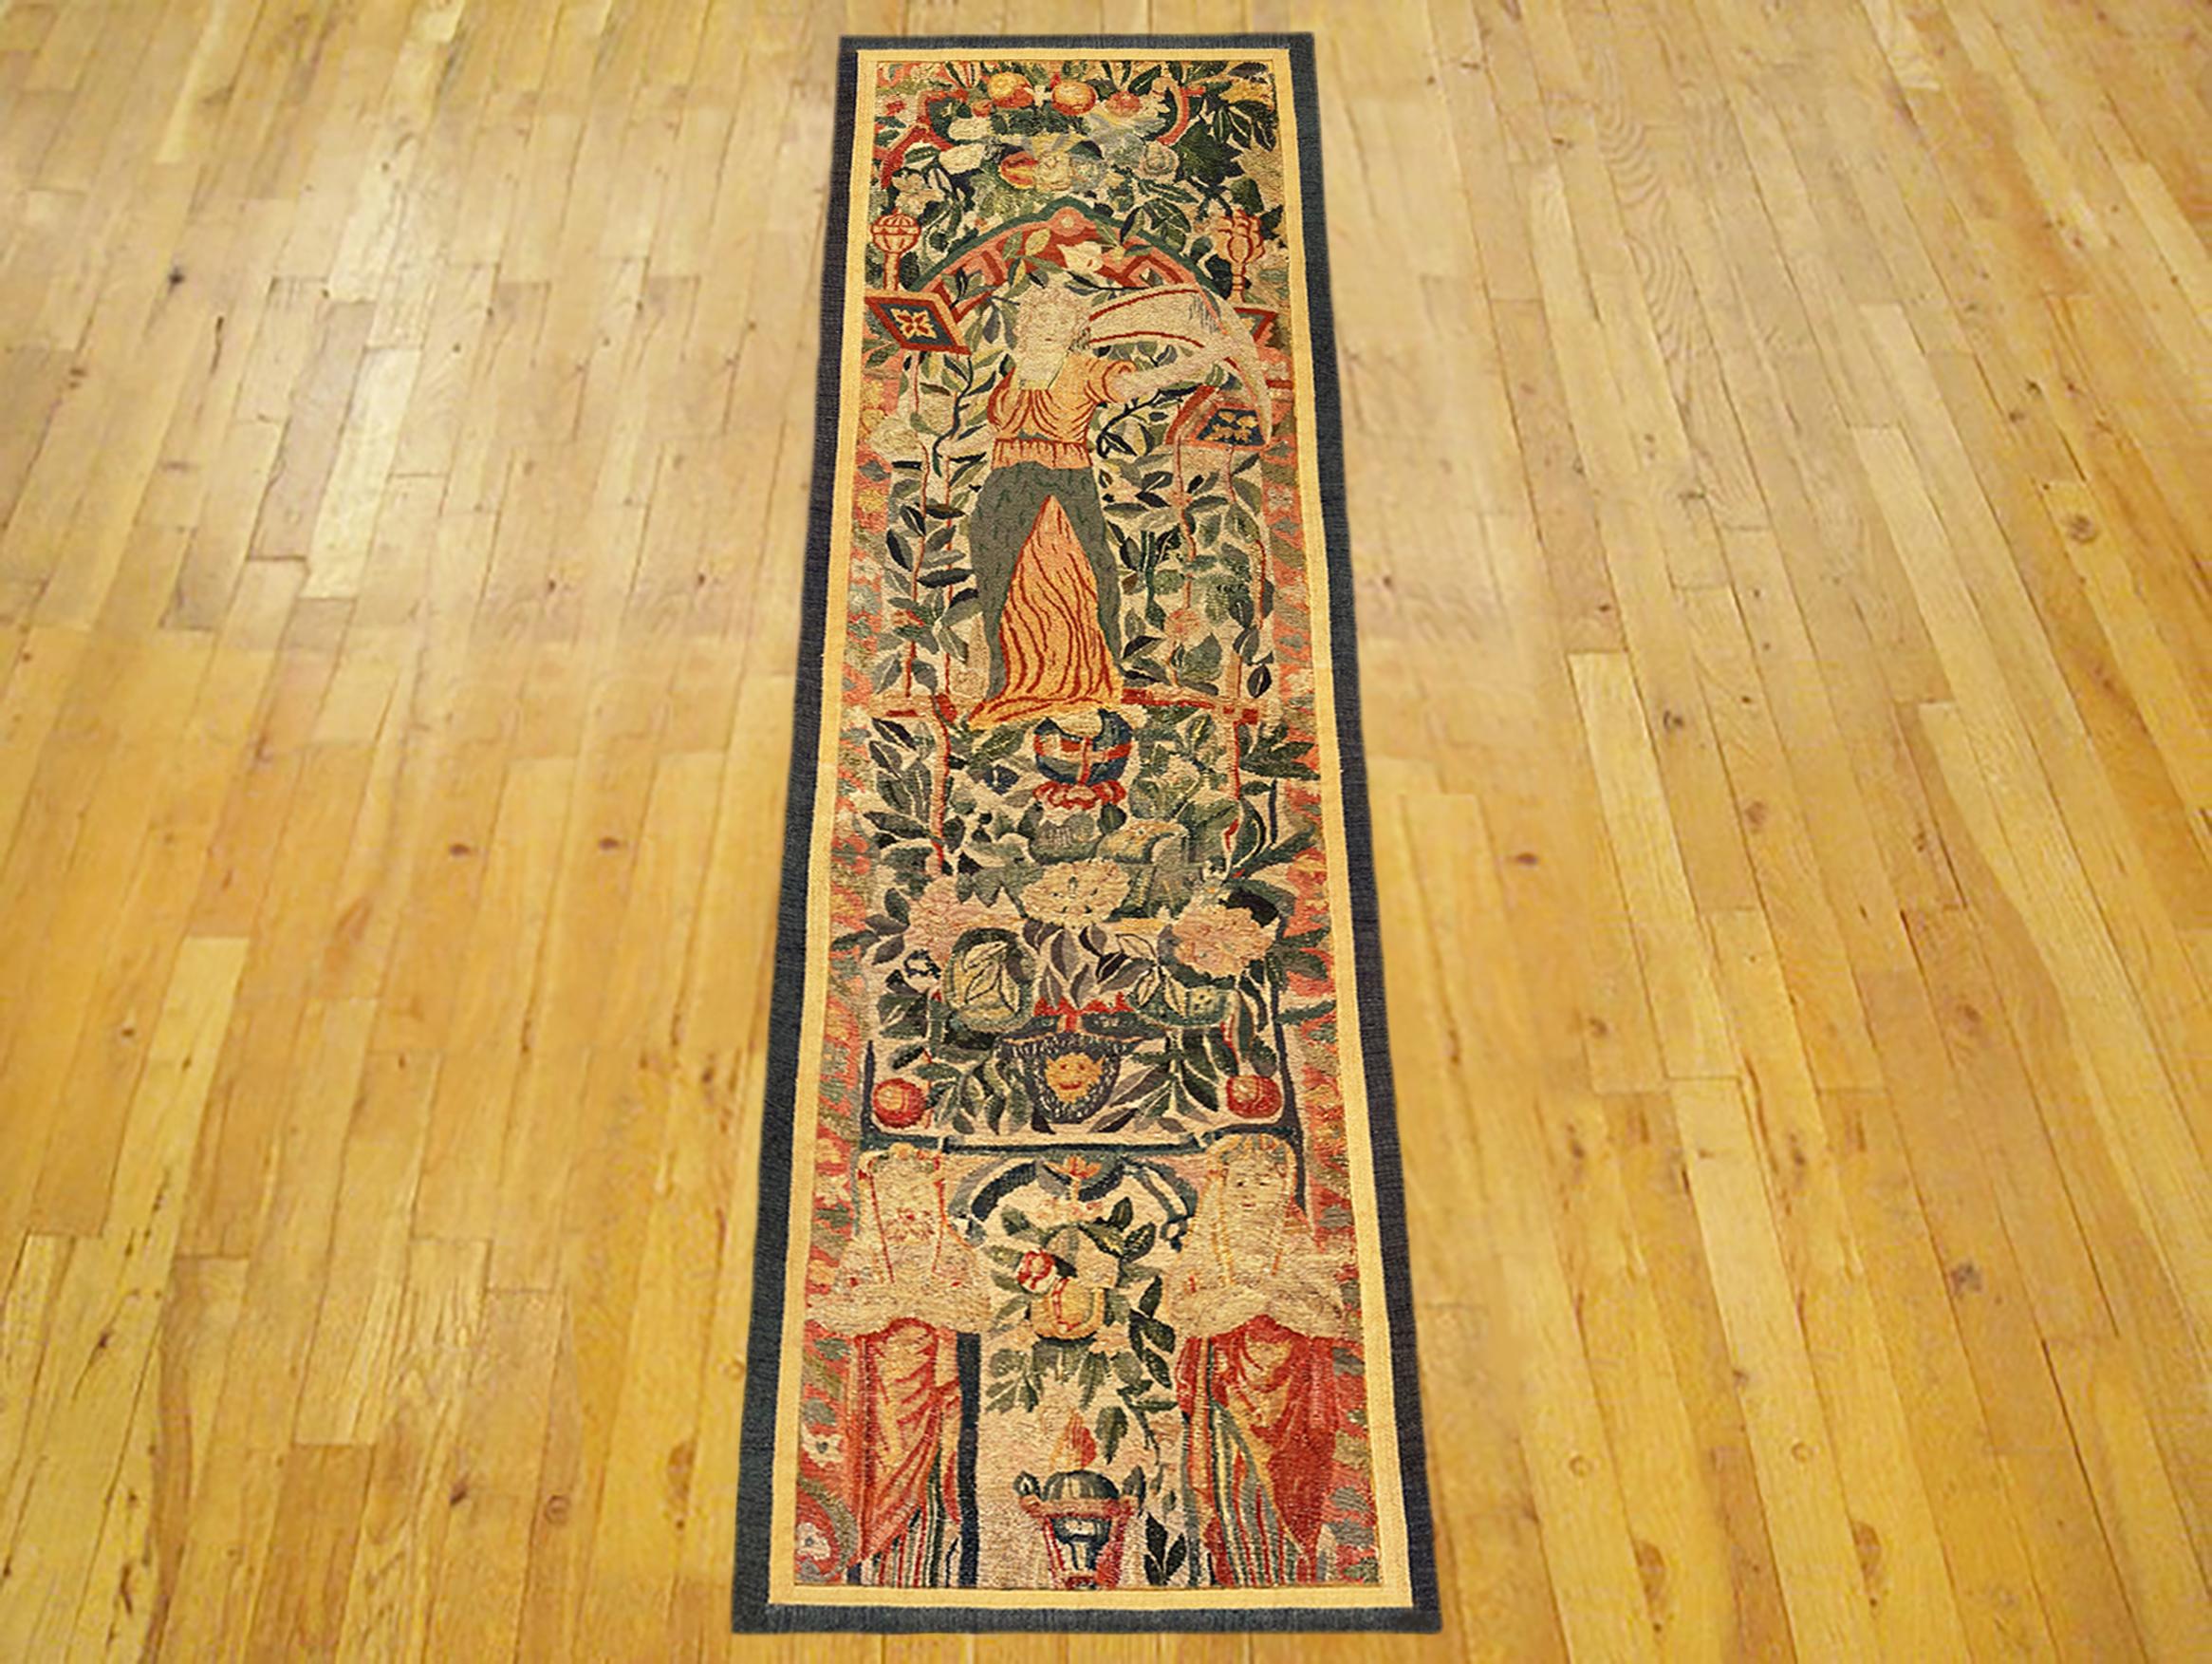 A Late 16th Century Flemish Mythological Tapestry Panel. This vertically oriented decorative tapestry panel depicts a mythological female figure at top, standing within an elaborate floral reserve, with flowers and a portion of an arch at bottom,